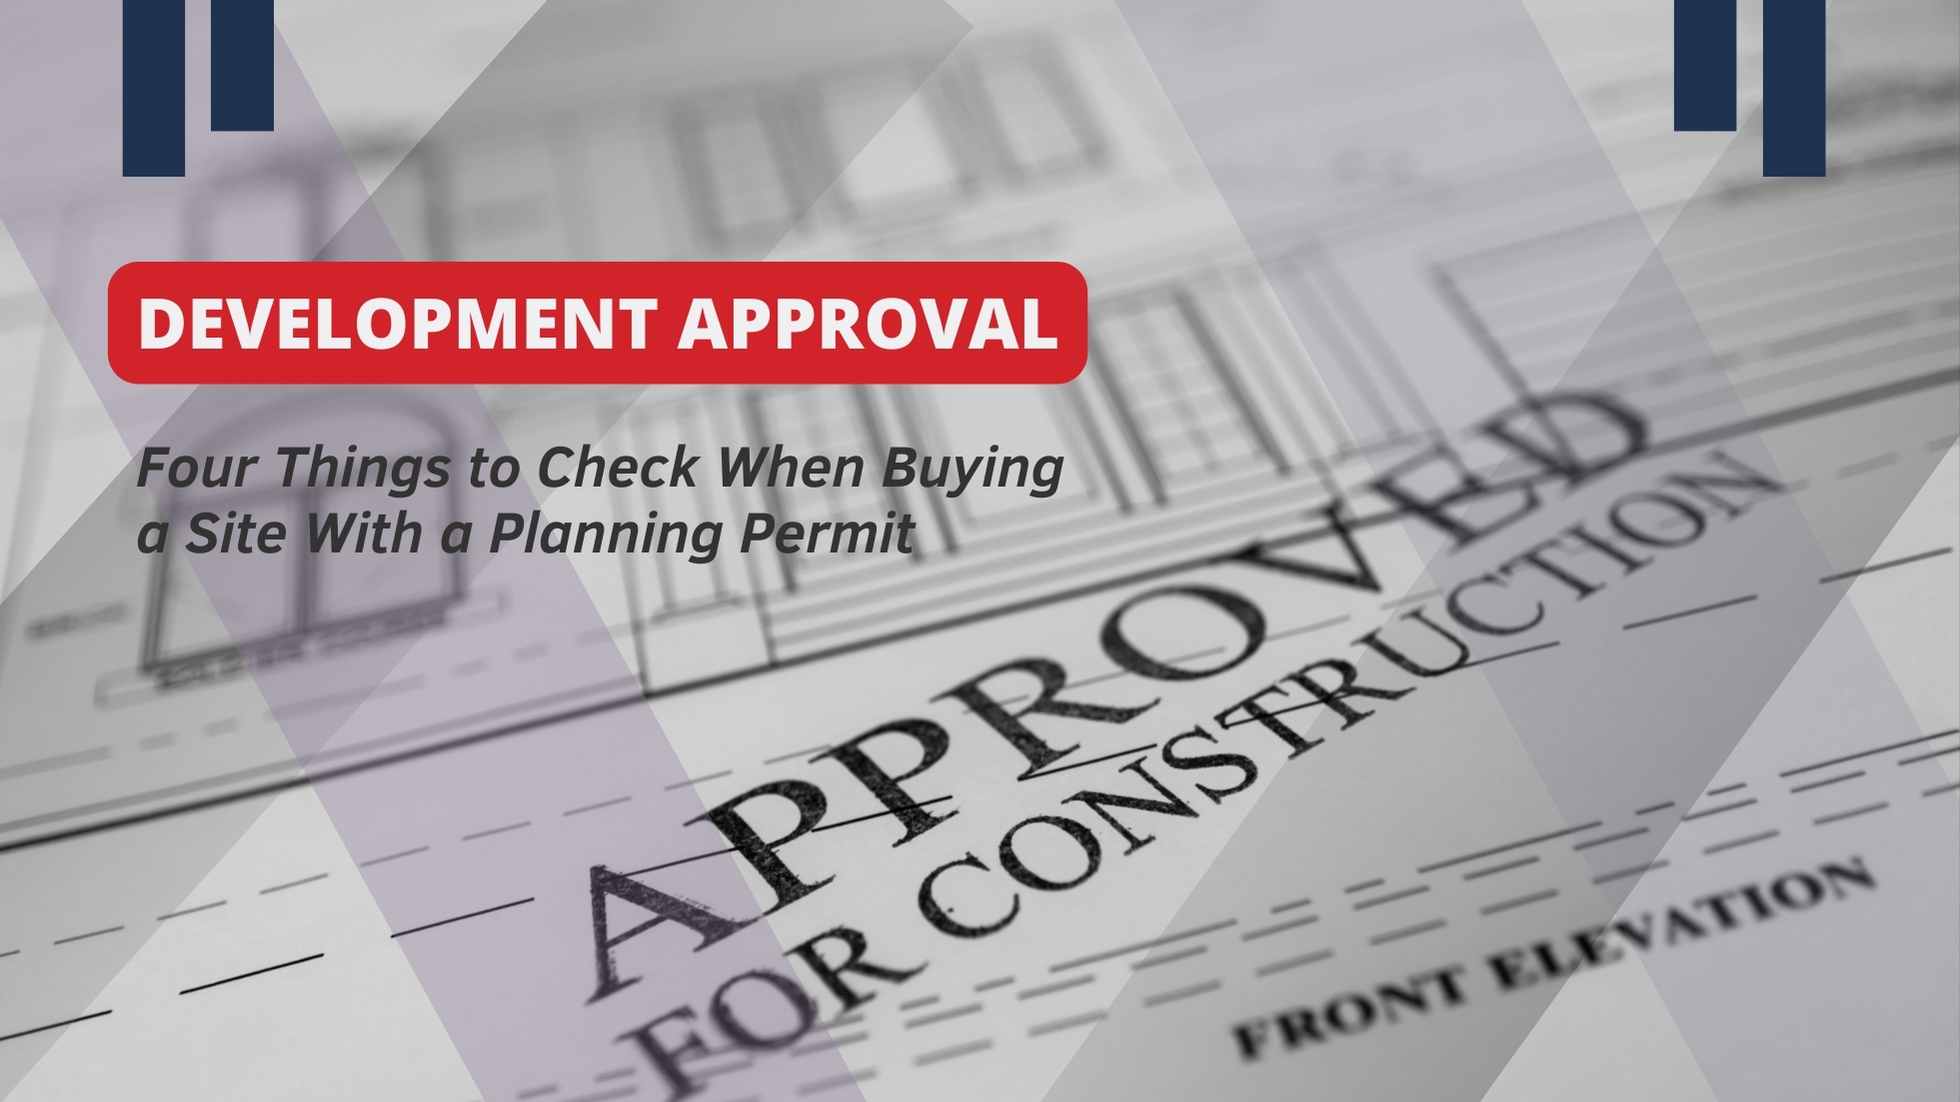 What to check when buying a site with a planning permit